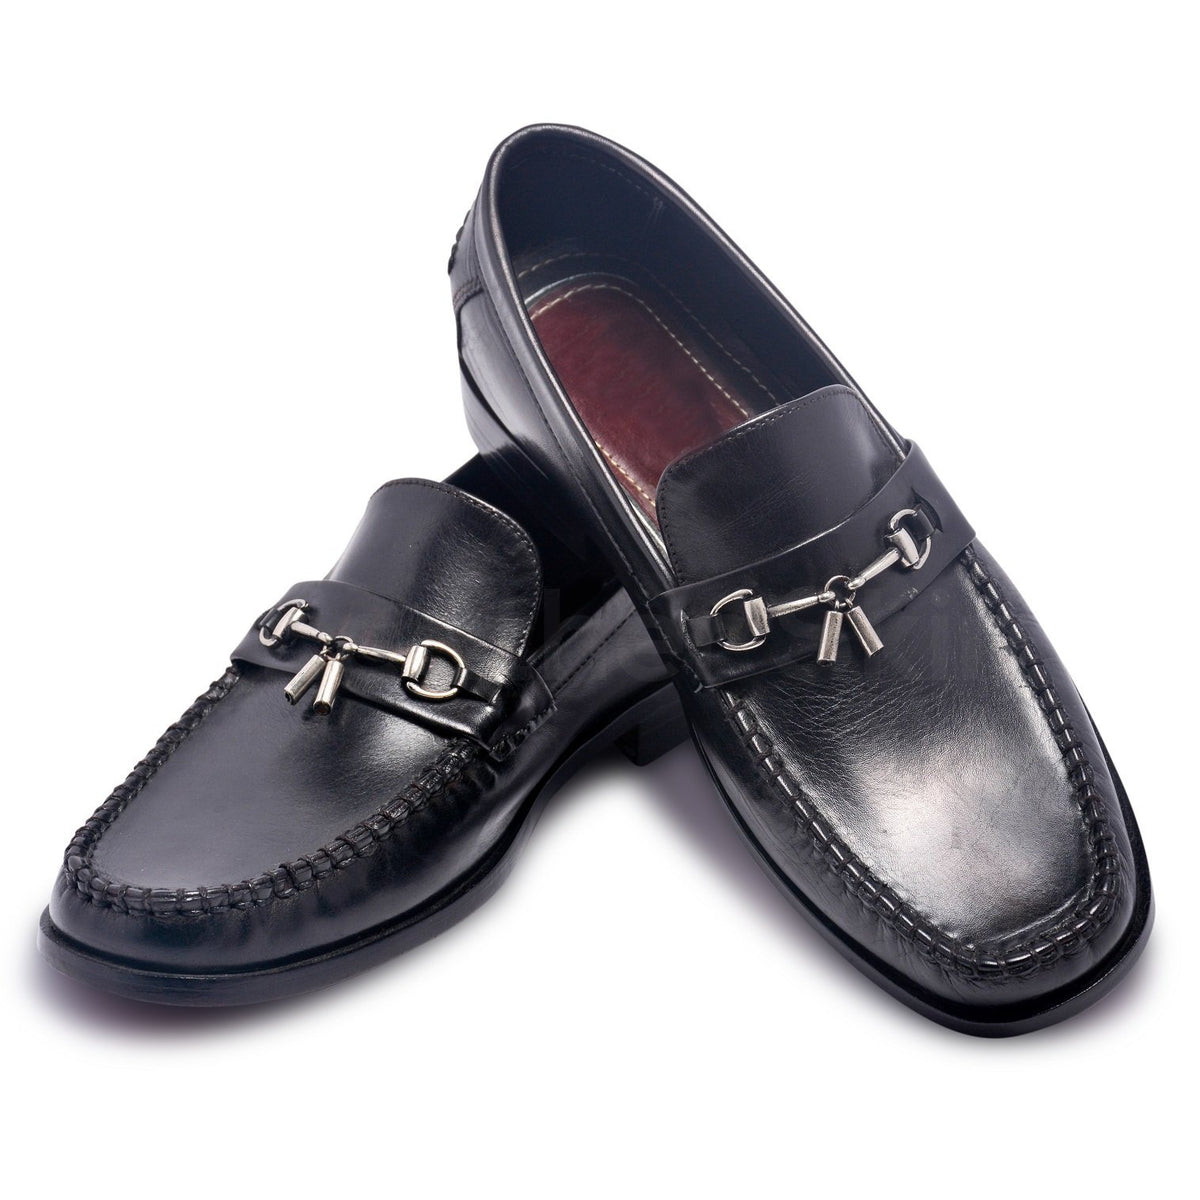 Mens Black Bit Loafers Shoes with Gold Metal Decoration - Leather Skin Shop